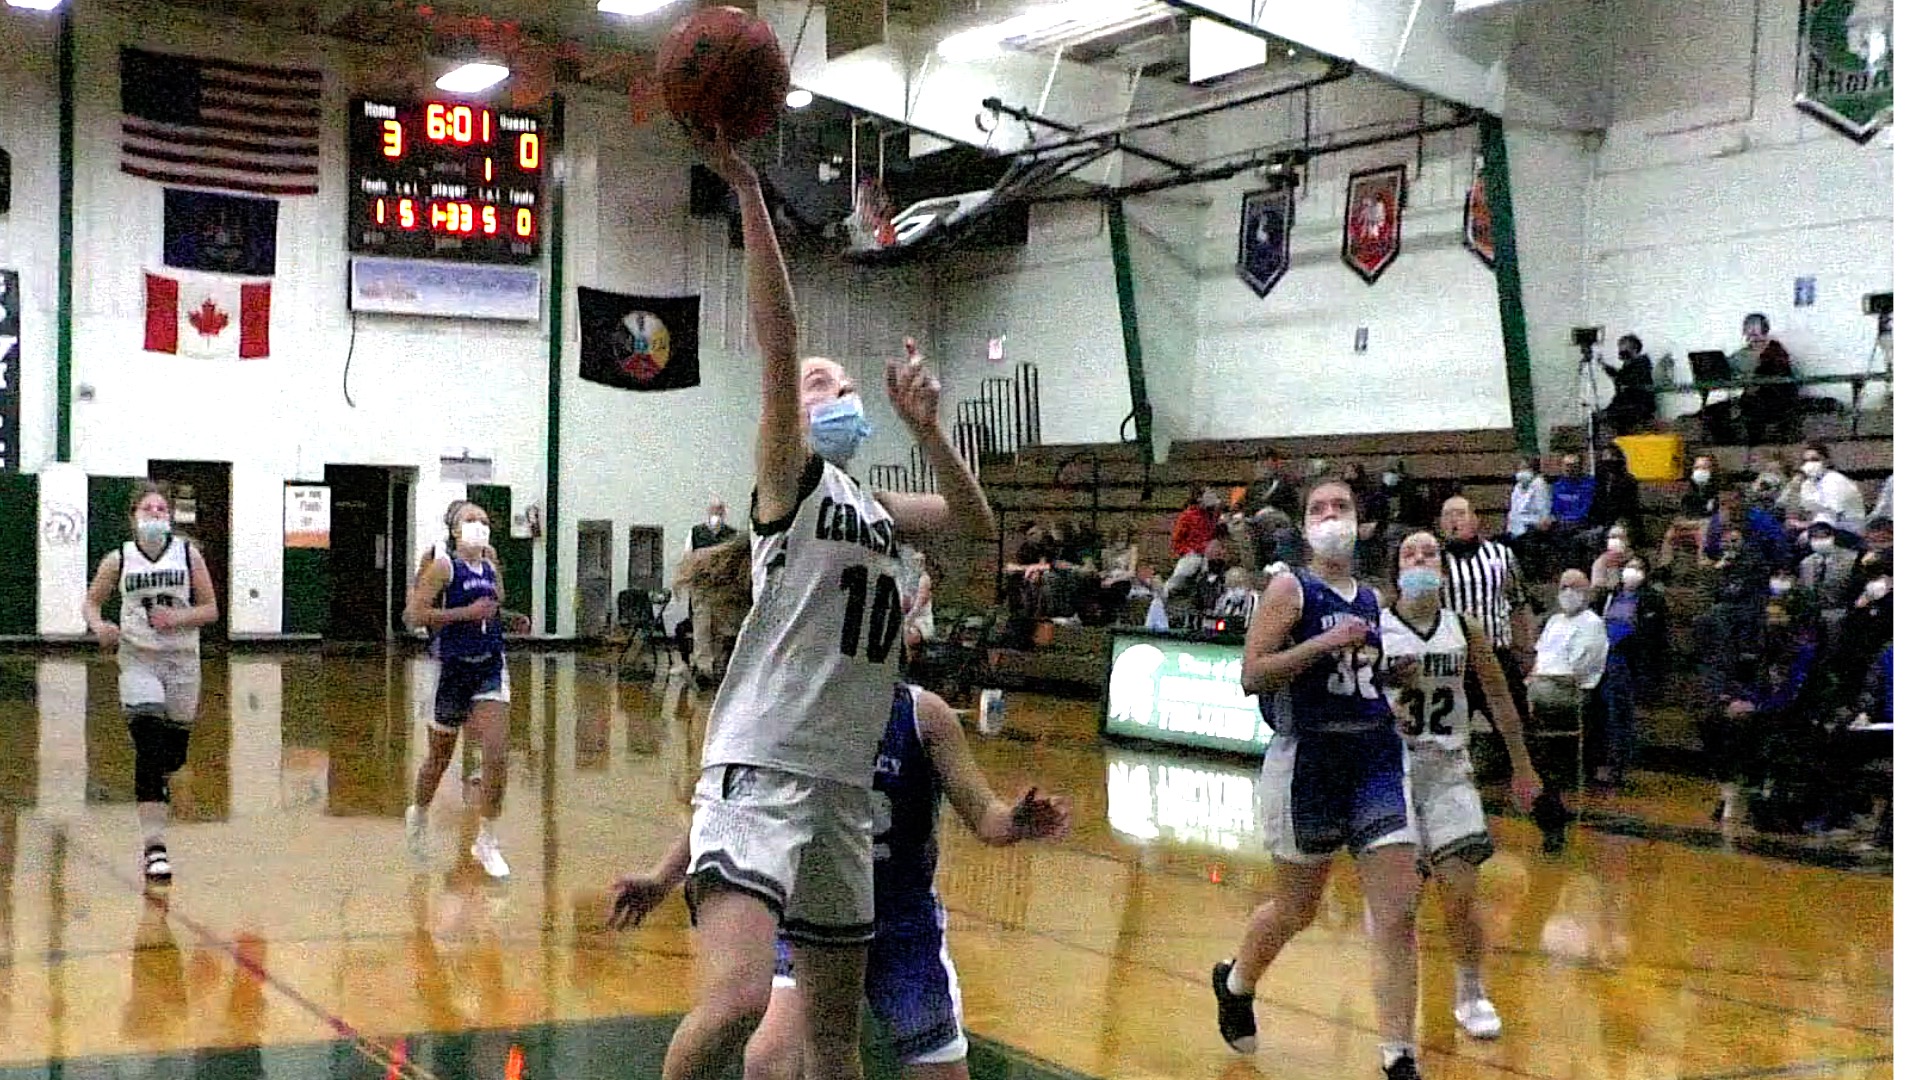 __HAYLEY KOHLMANN SCORES ON A LAY UP IN FIRST QUARTER ACTION AGAINST BRIMLEY THURSDAY EVENING.